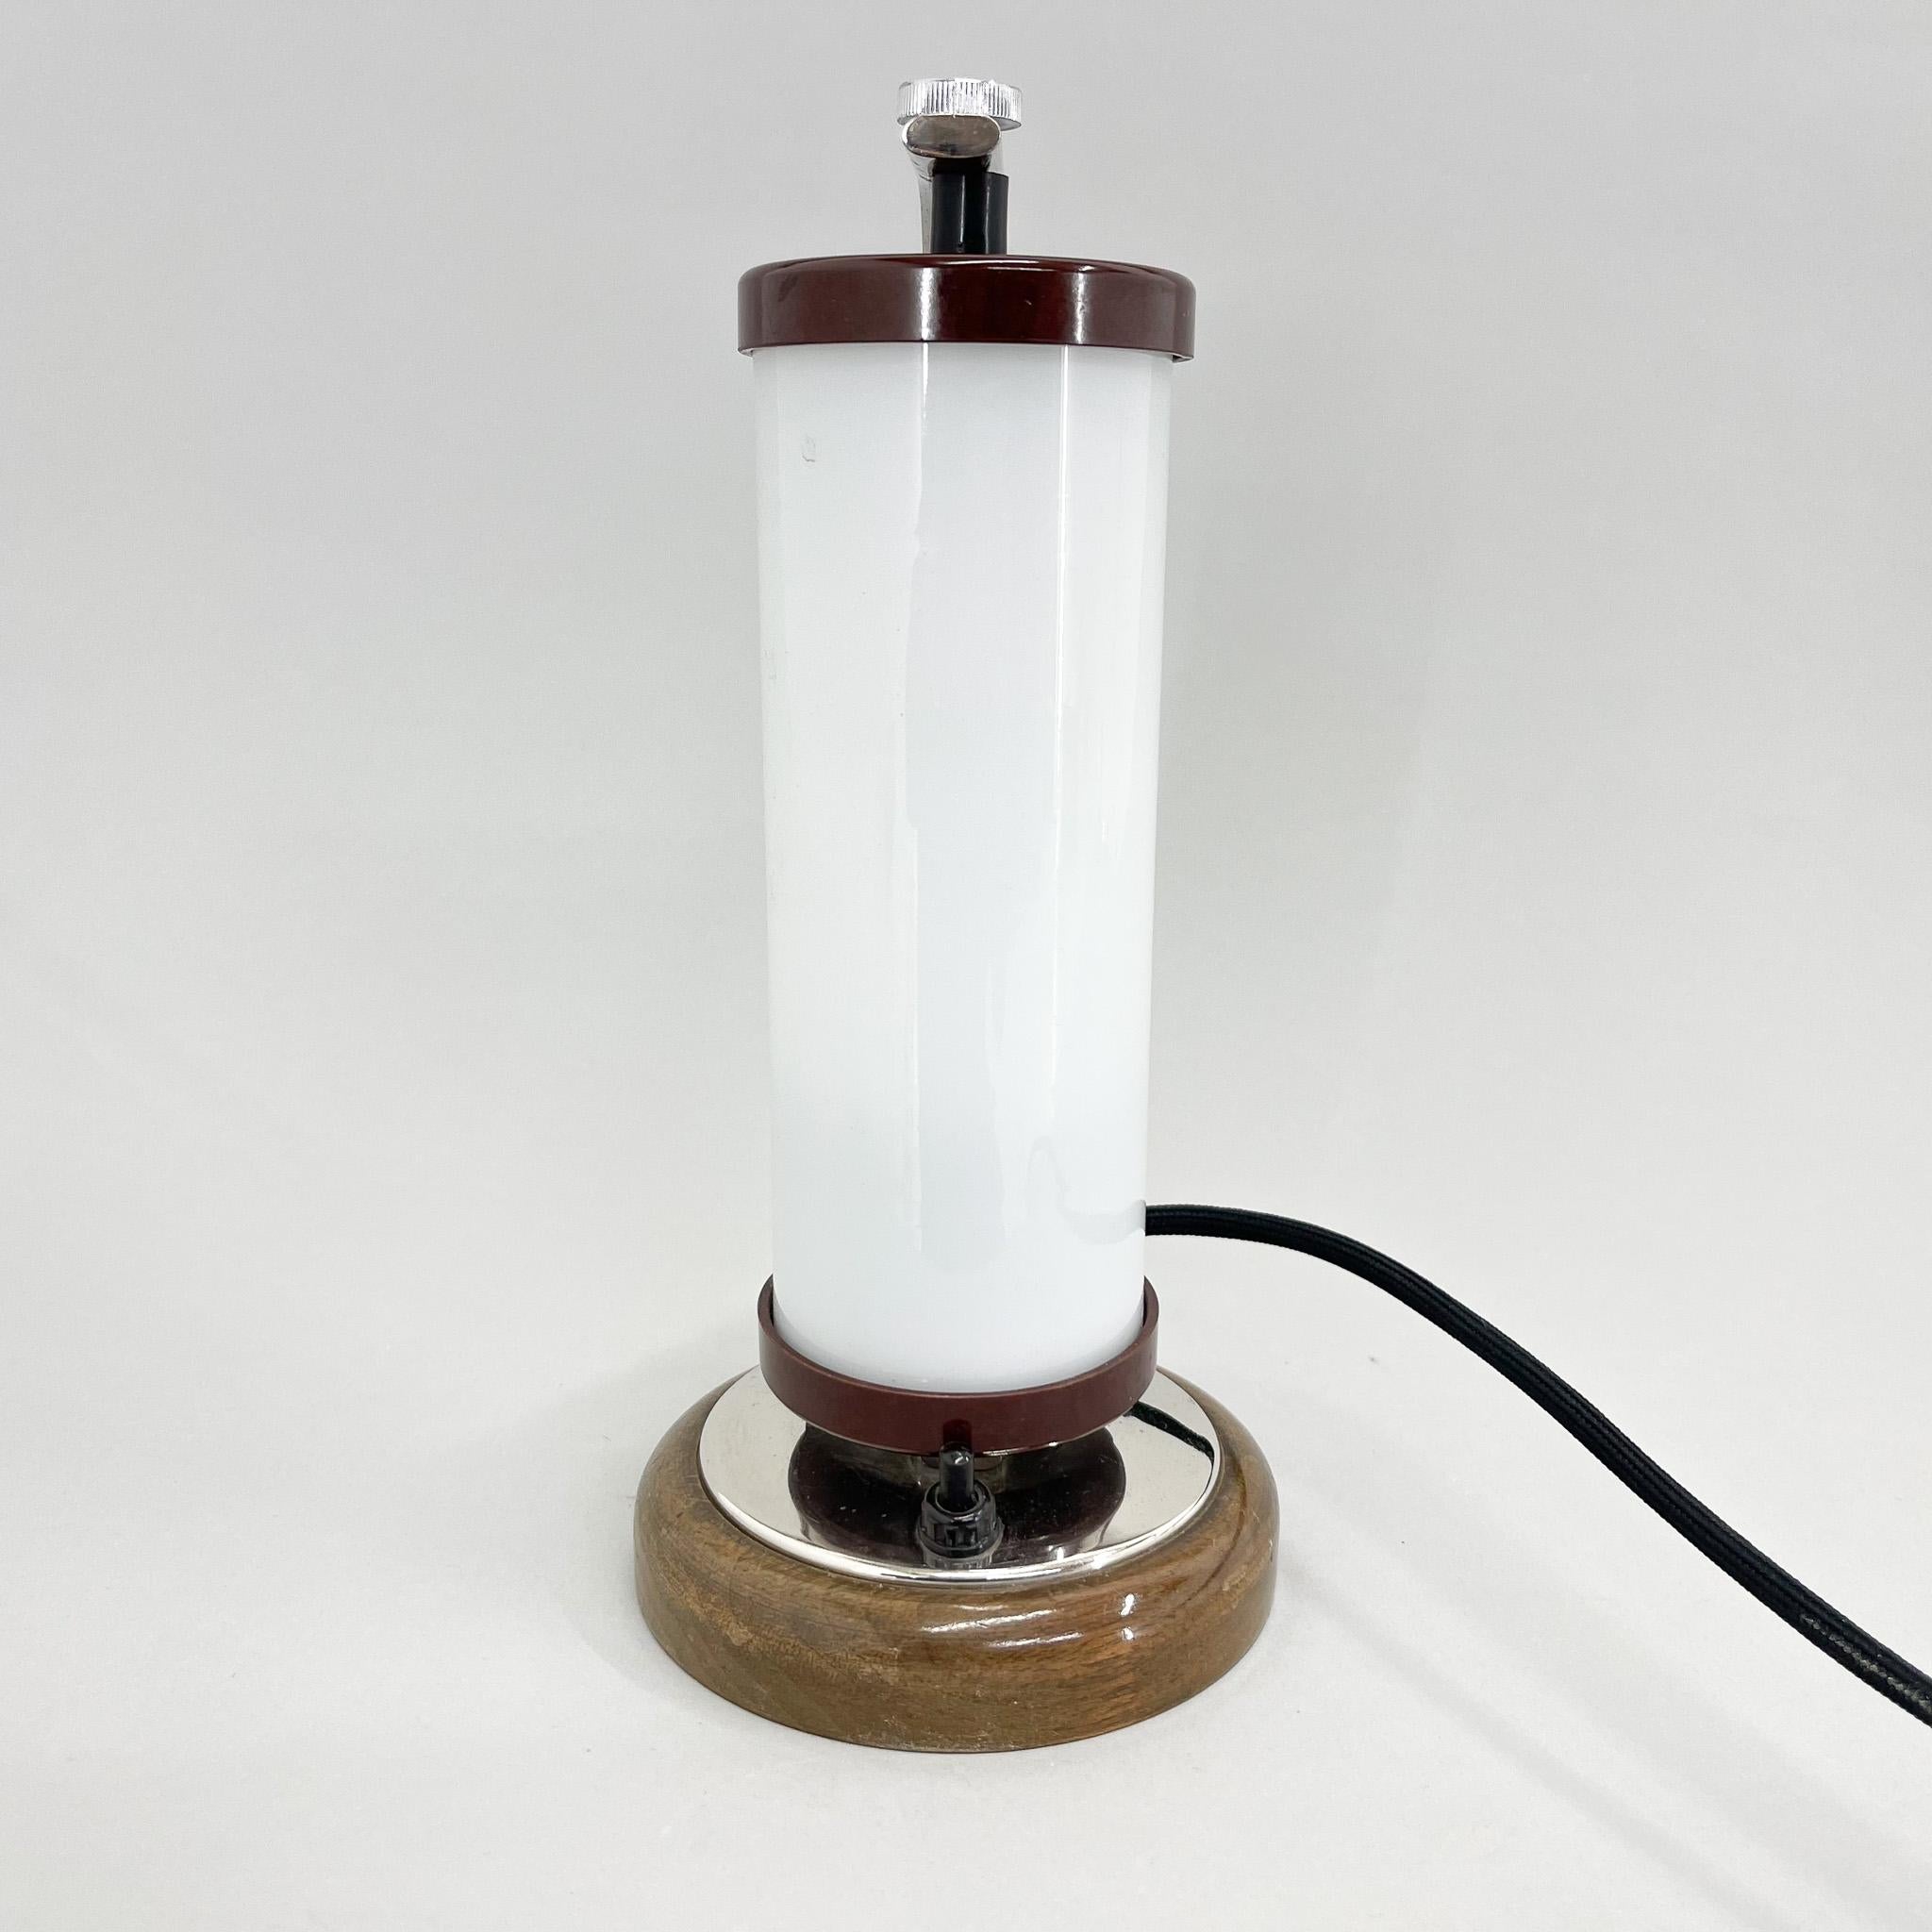 Tubular Table or Bedside Lamp with Wooden Base, 1930's In Good Condition For Sale In Praha, CZ